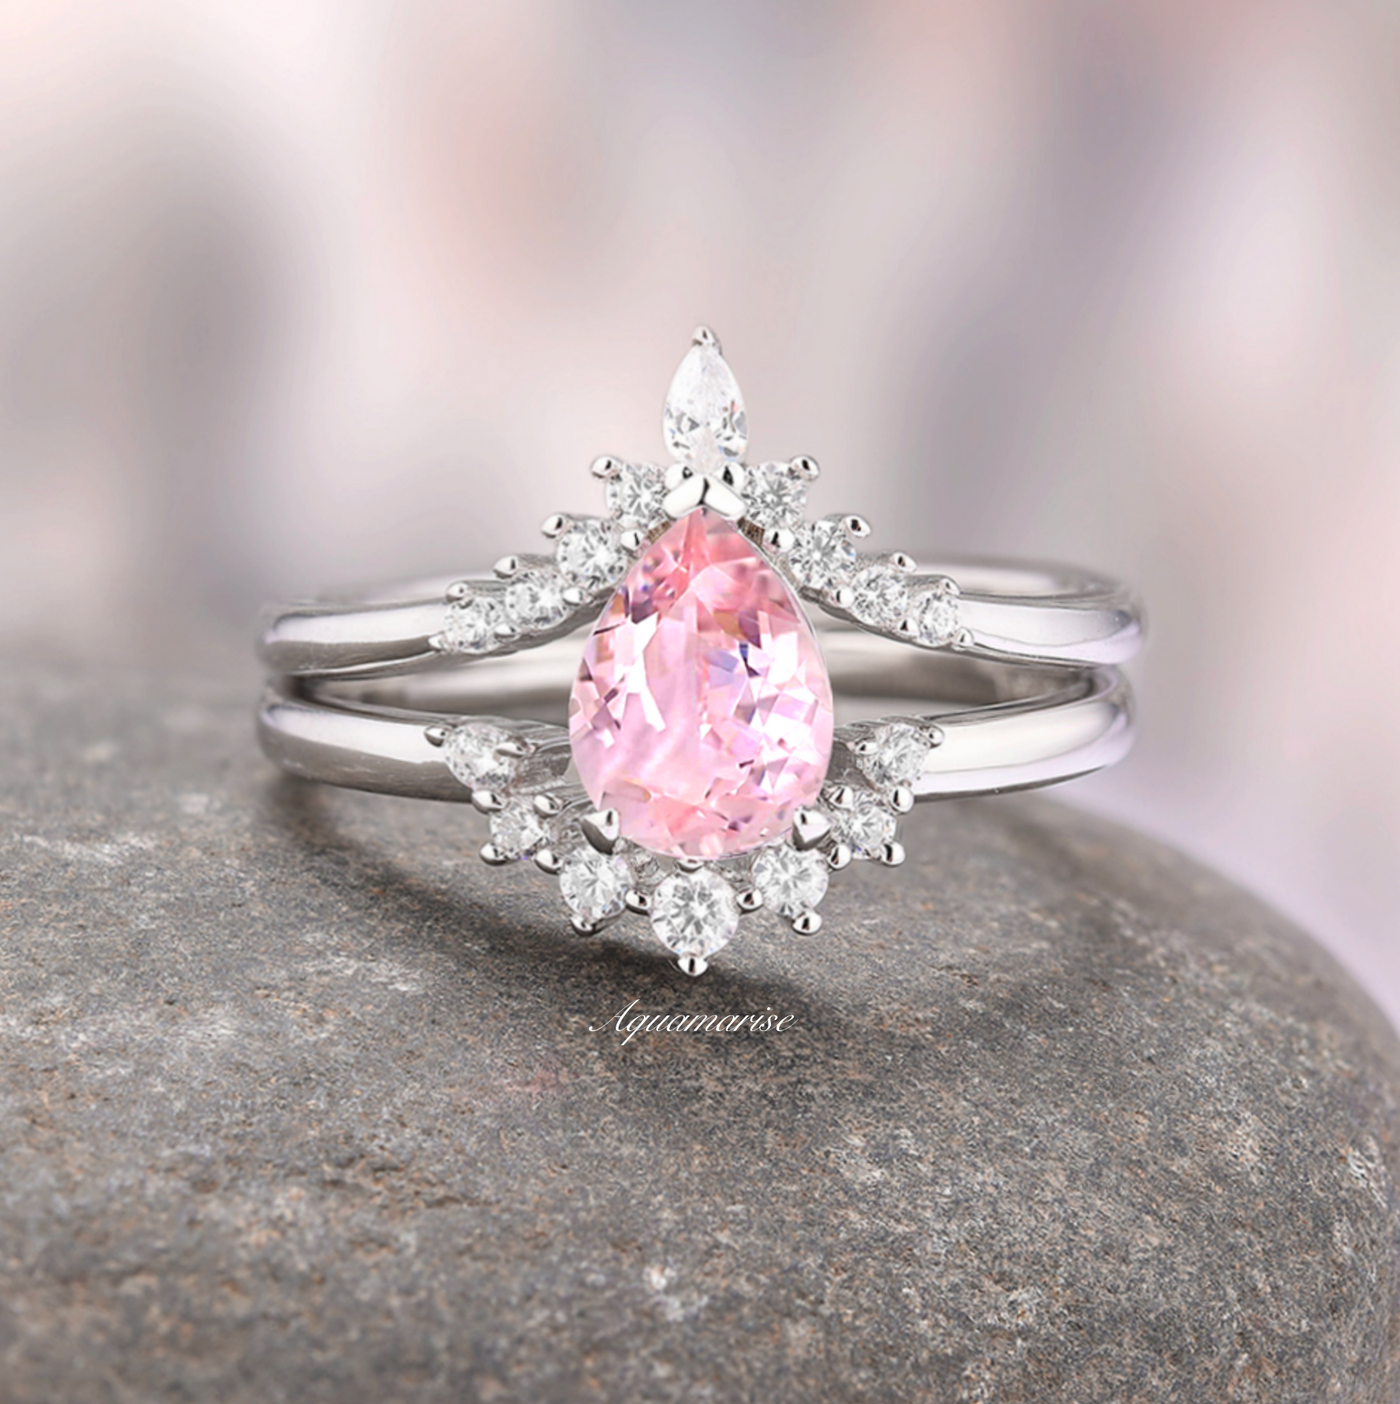 Lunette Teardrop Pink Tourmaline Ring Set- Sterling Silver Unique Engagement Ring For Women- Dainty Promise Ring- October Birthstone- Gift For Her